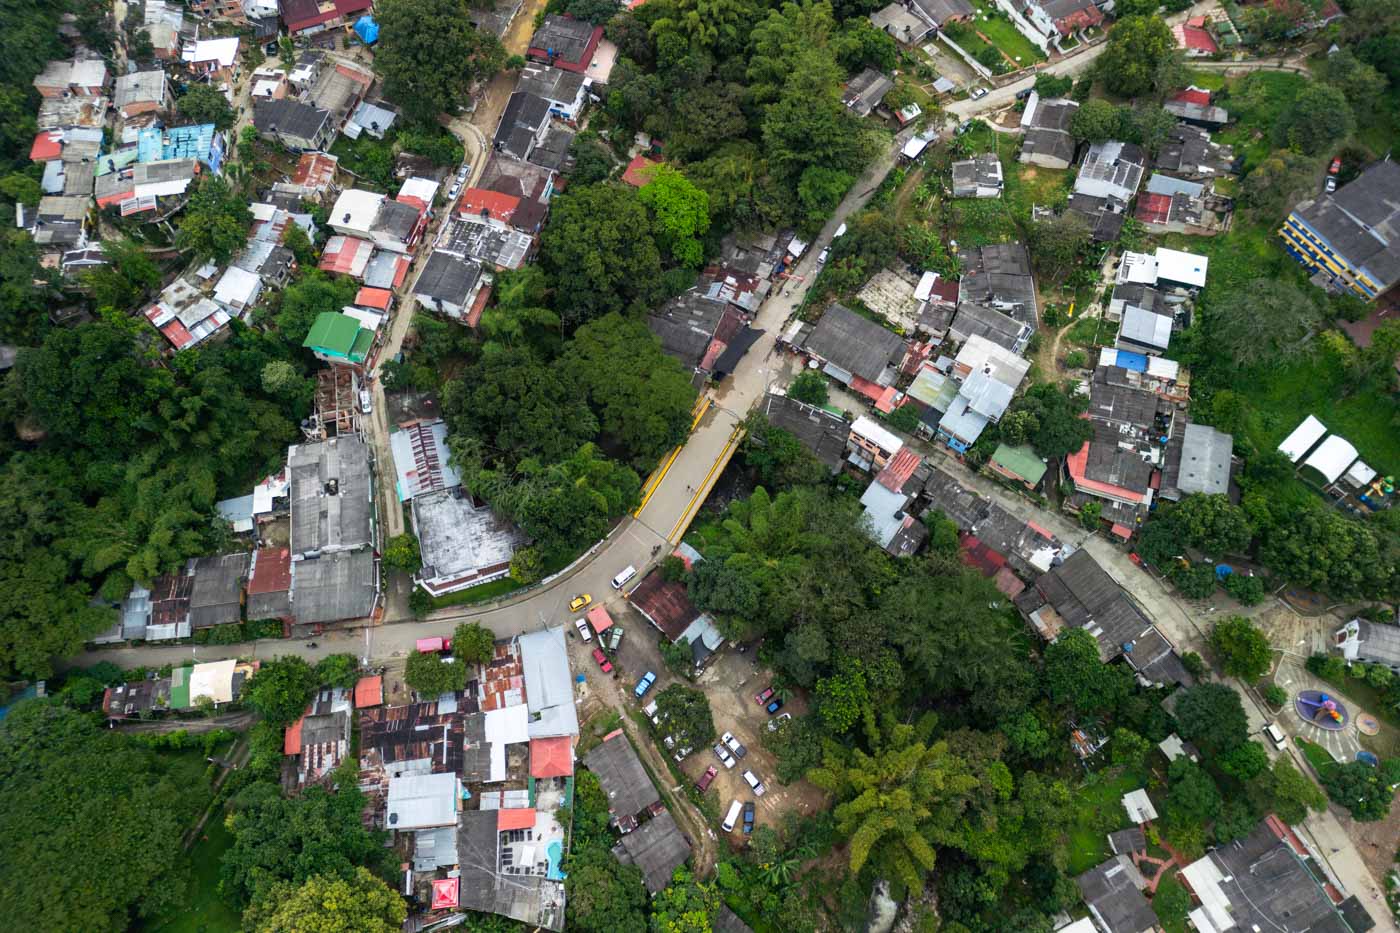 Aerial image over Minca village with a view of the bridge in the center and roads leading off of the main road.